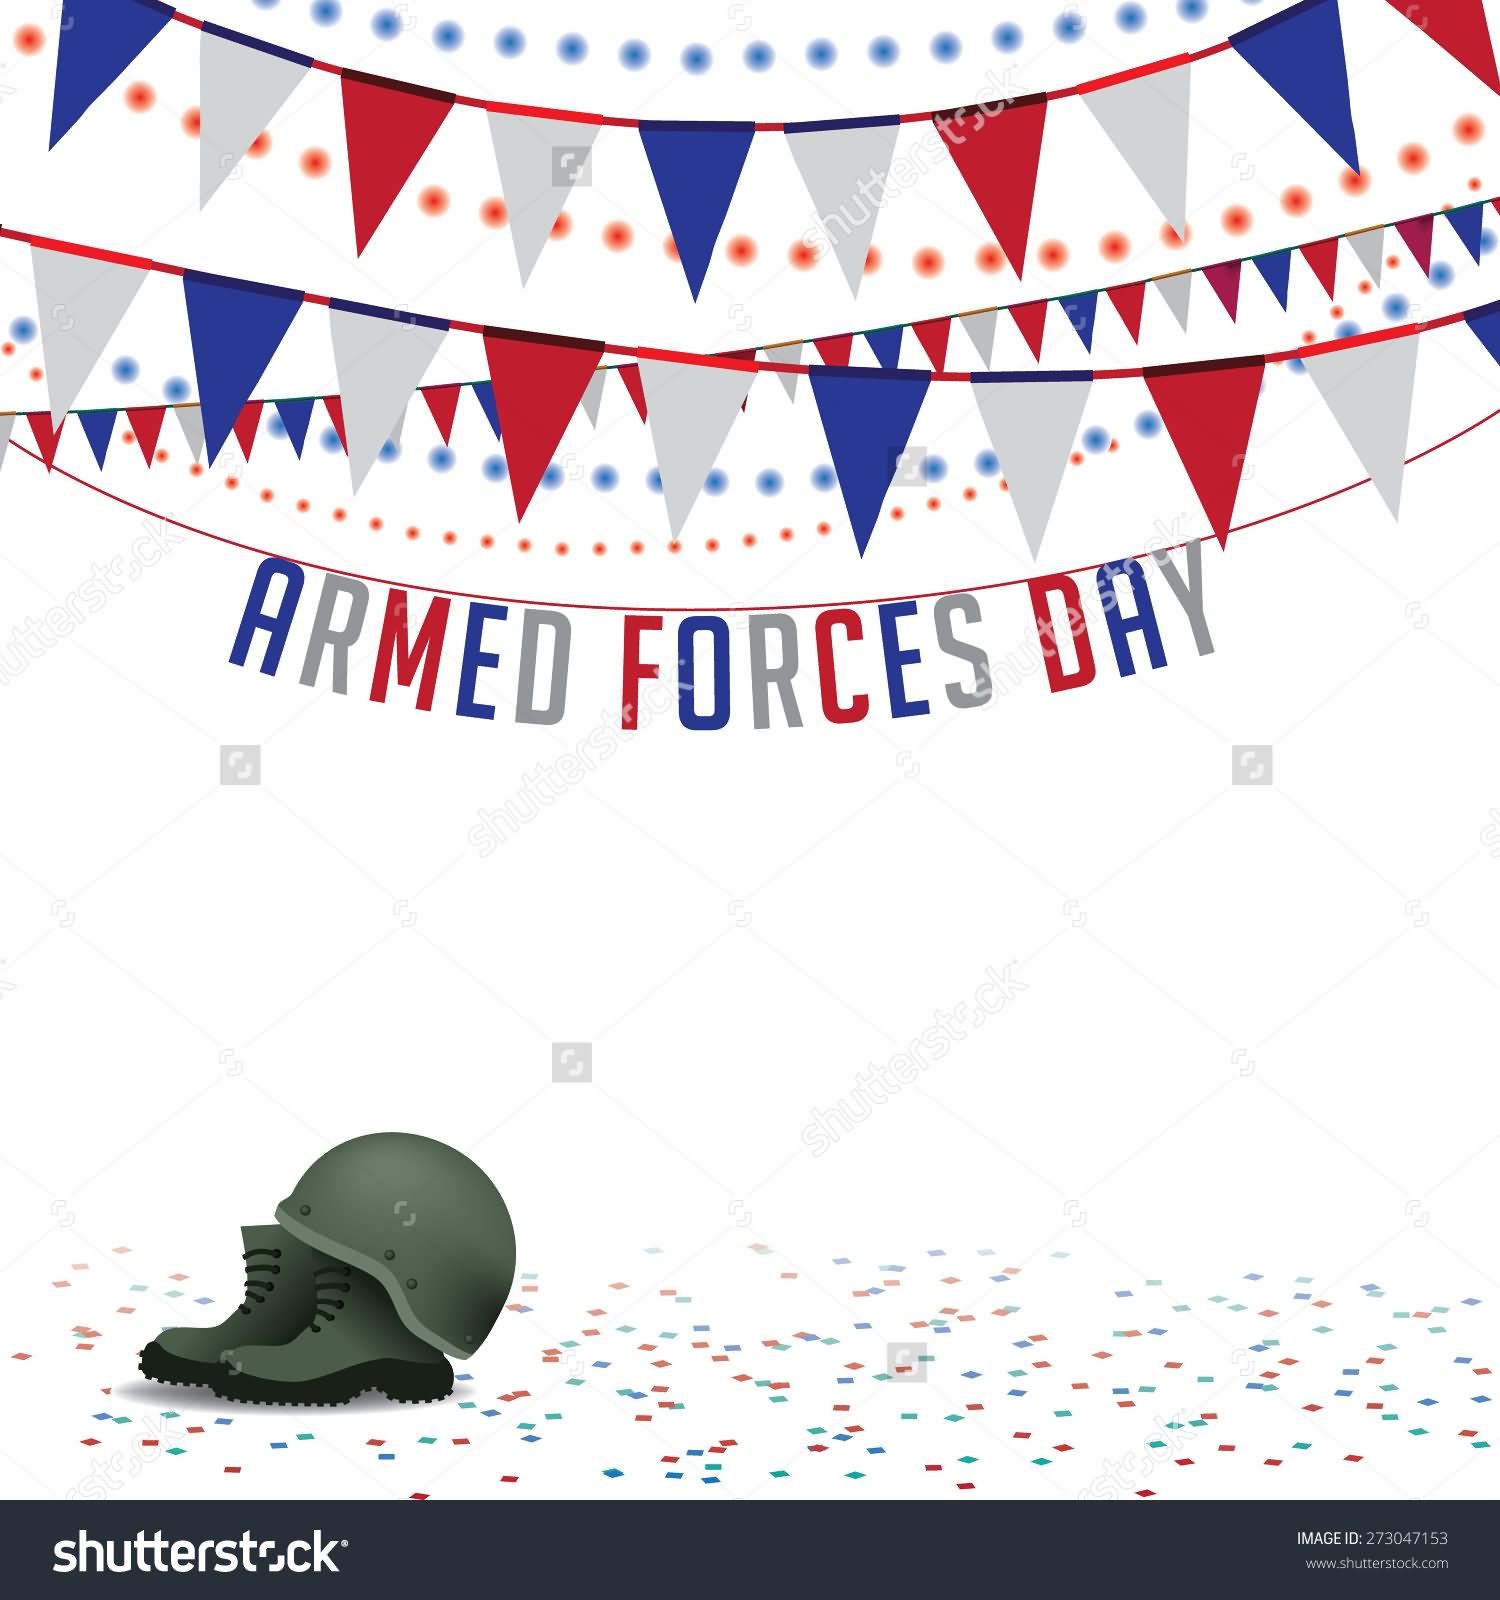 Armed Forces Day Wishes